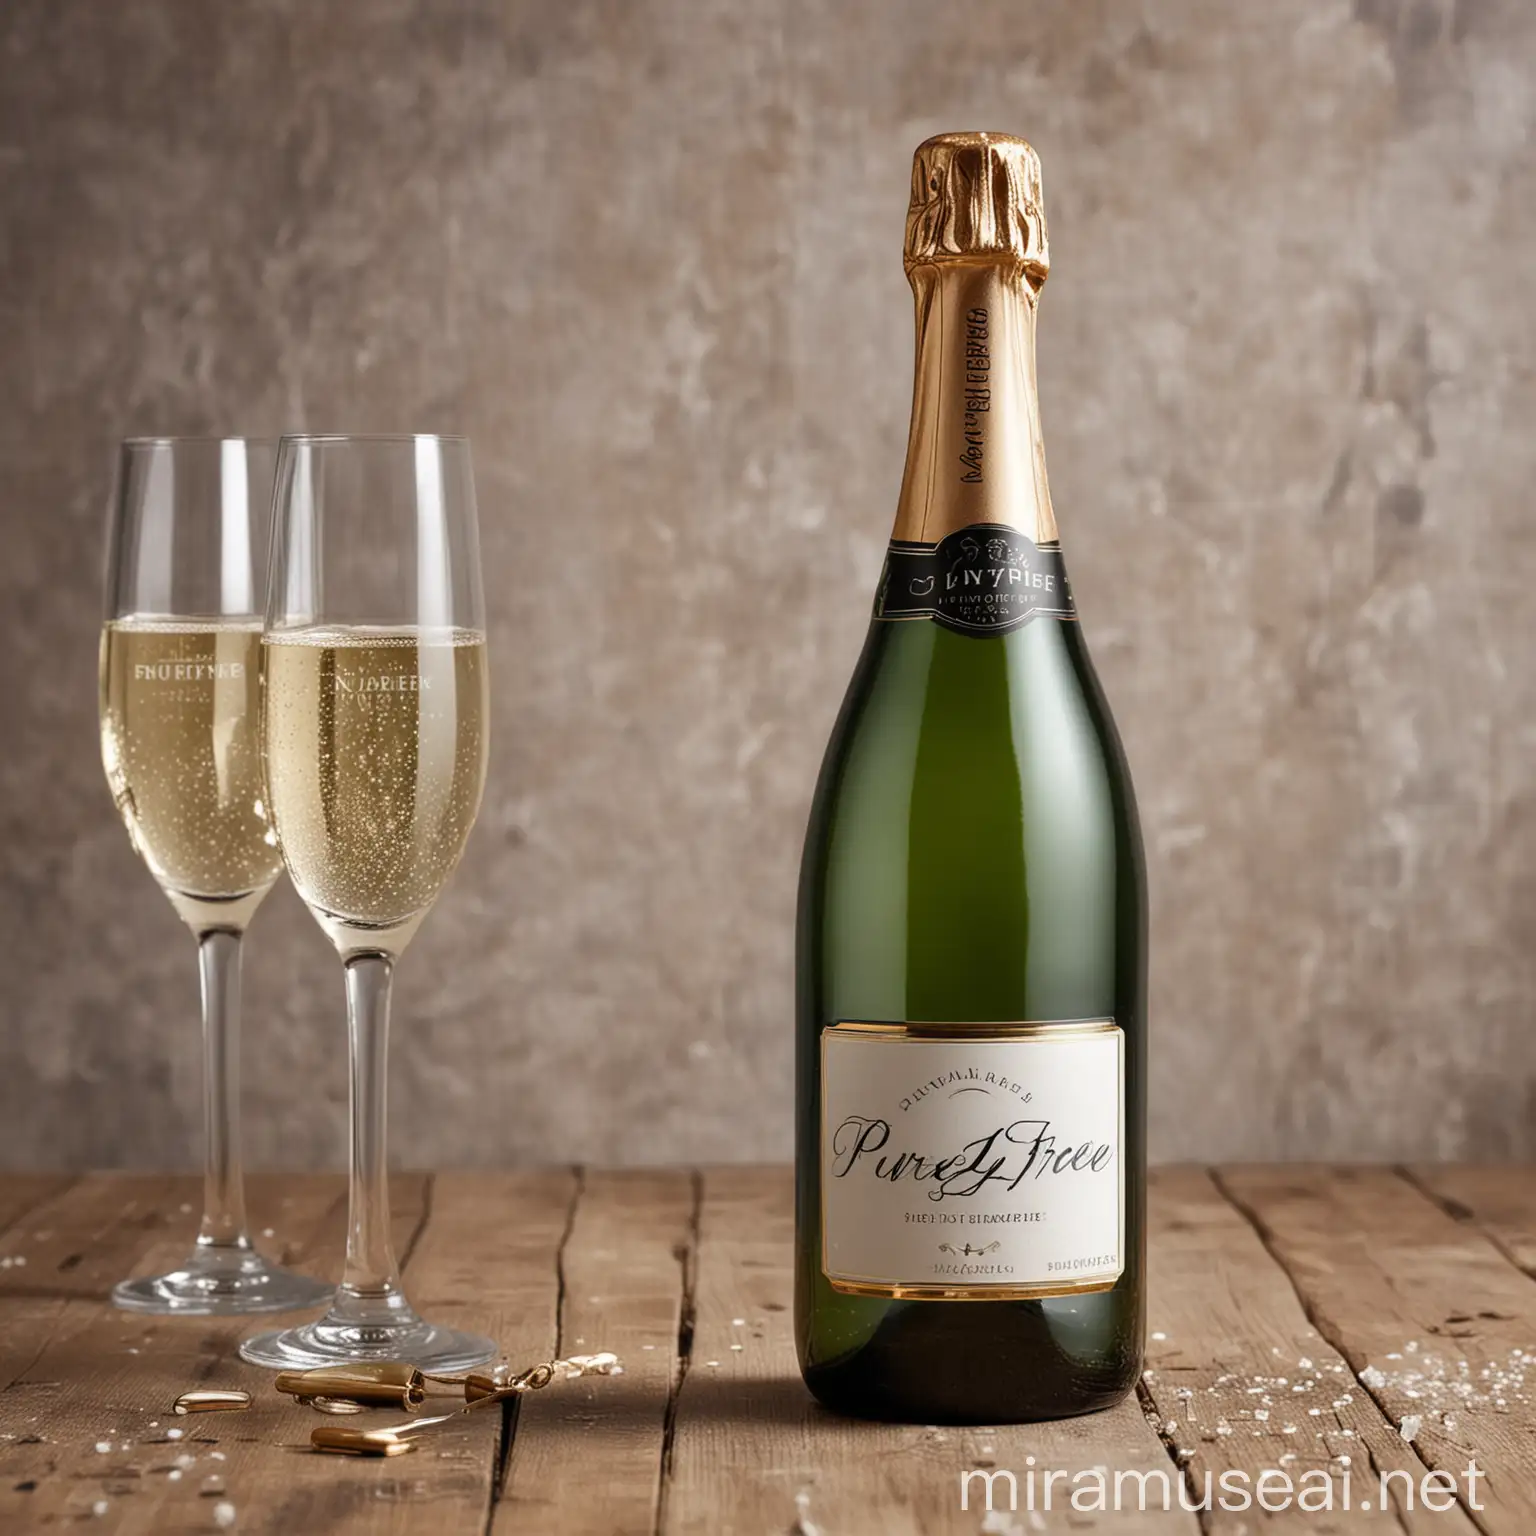 Create a fancy photo with the glass and bottle of non-alcoholic champagne with the name on It "PurelyFree"
